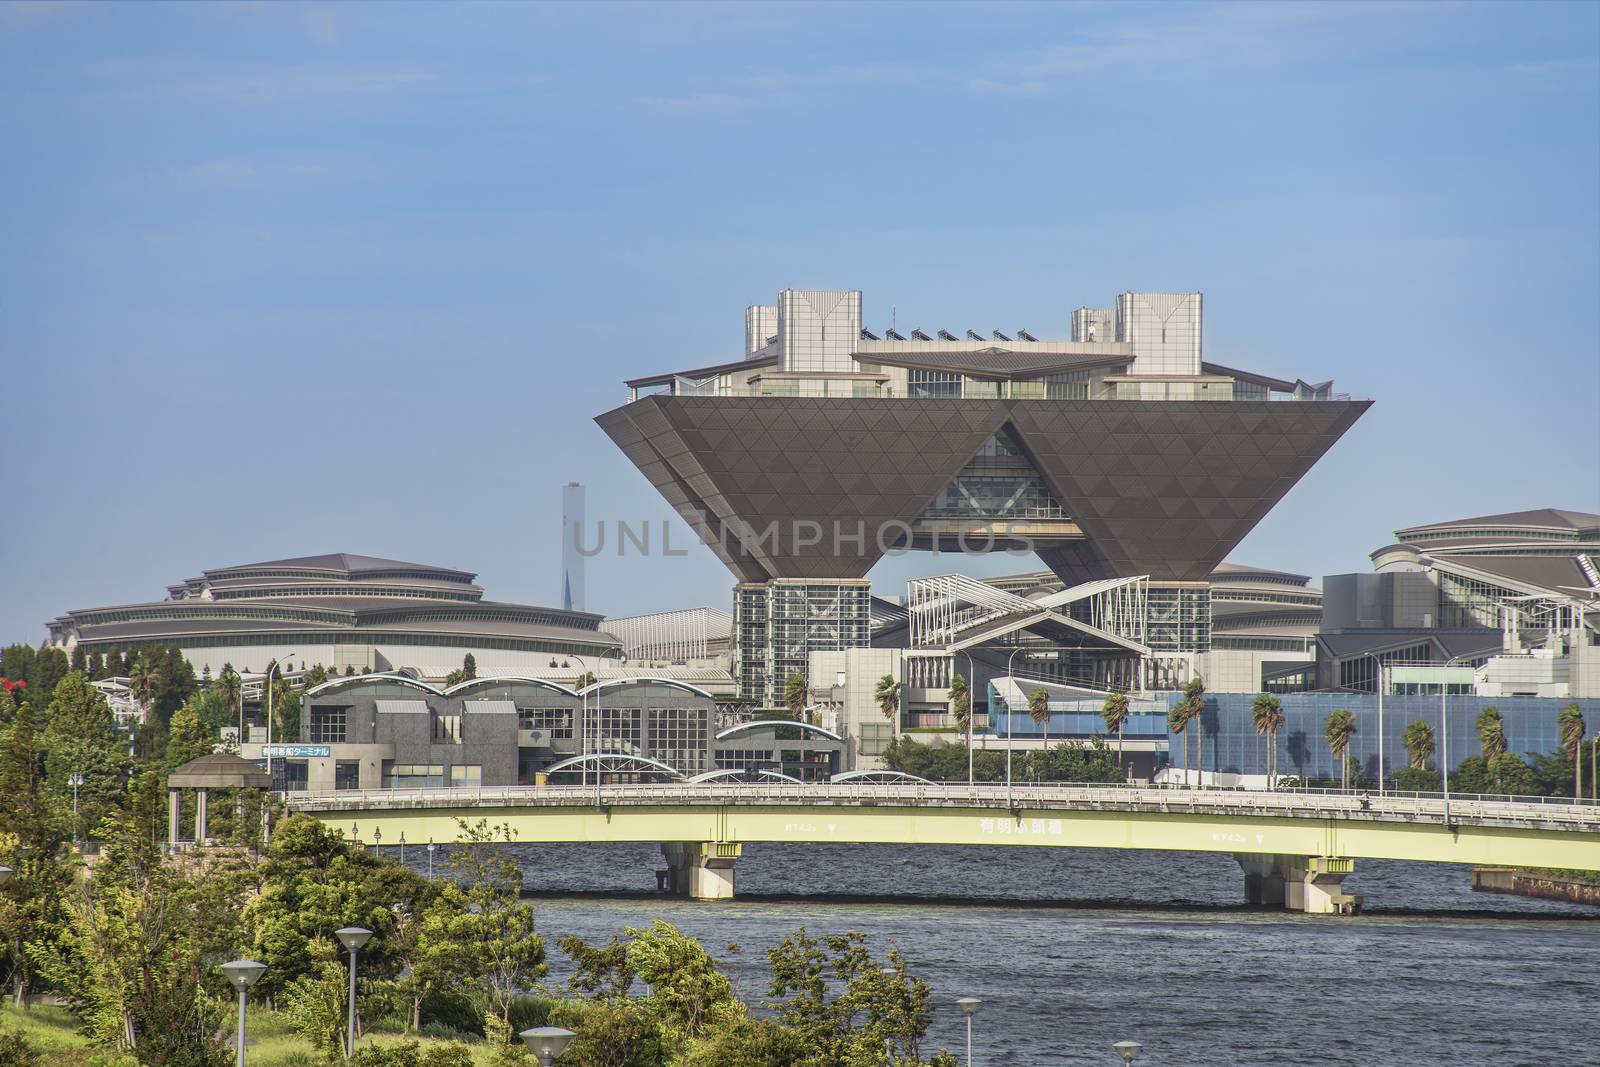 The Tokyo International Exhibition Center more commonly called Tokyo Big Sight is a palace of congresses located in Tokyo Japan. In the summer blue sky its very particular shape gives it a UFO appearance.